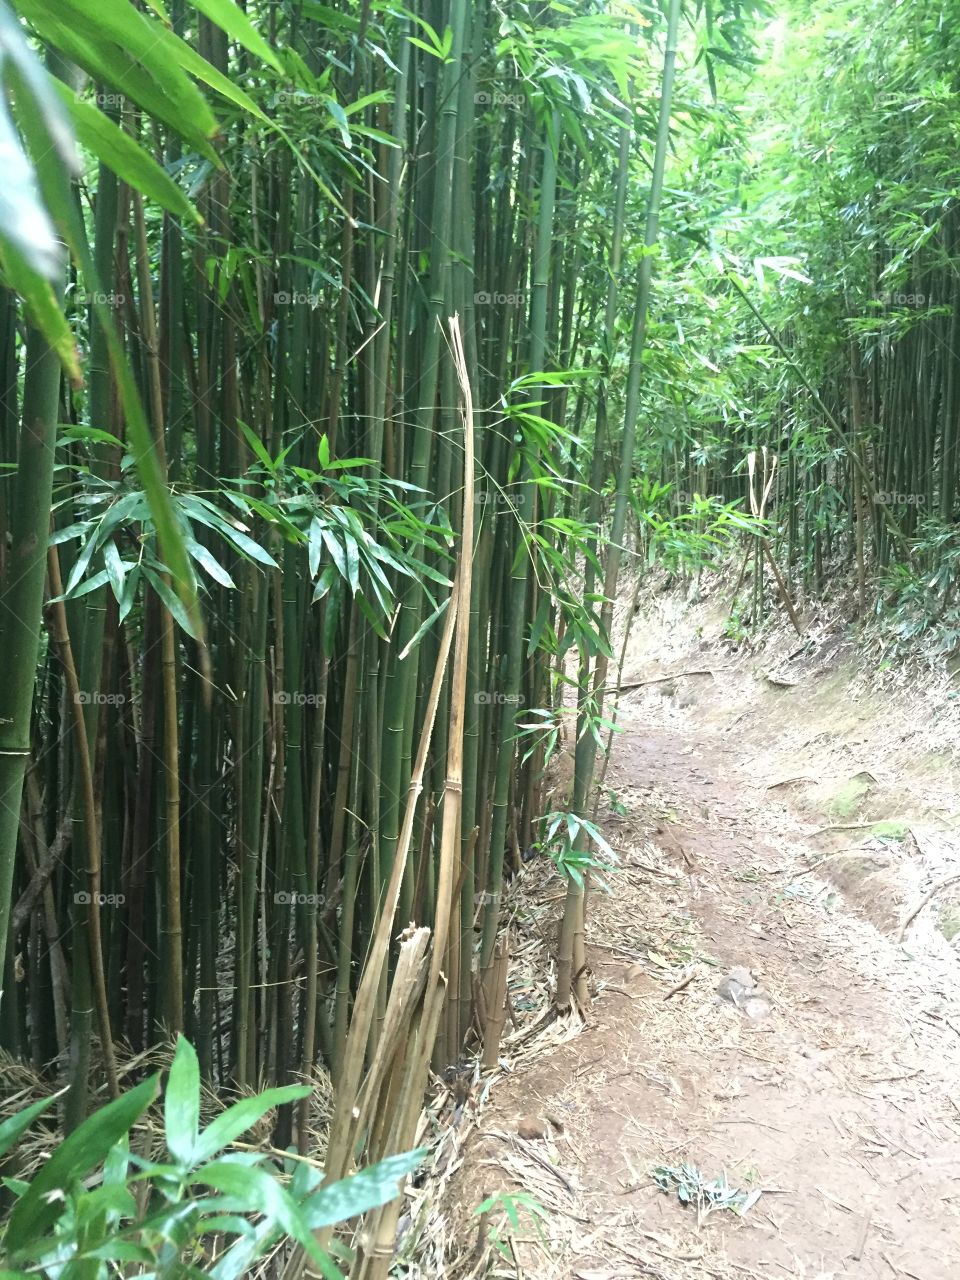 Bamboo forest, where's the panda?